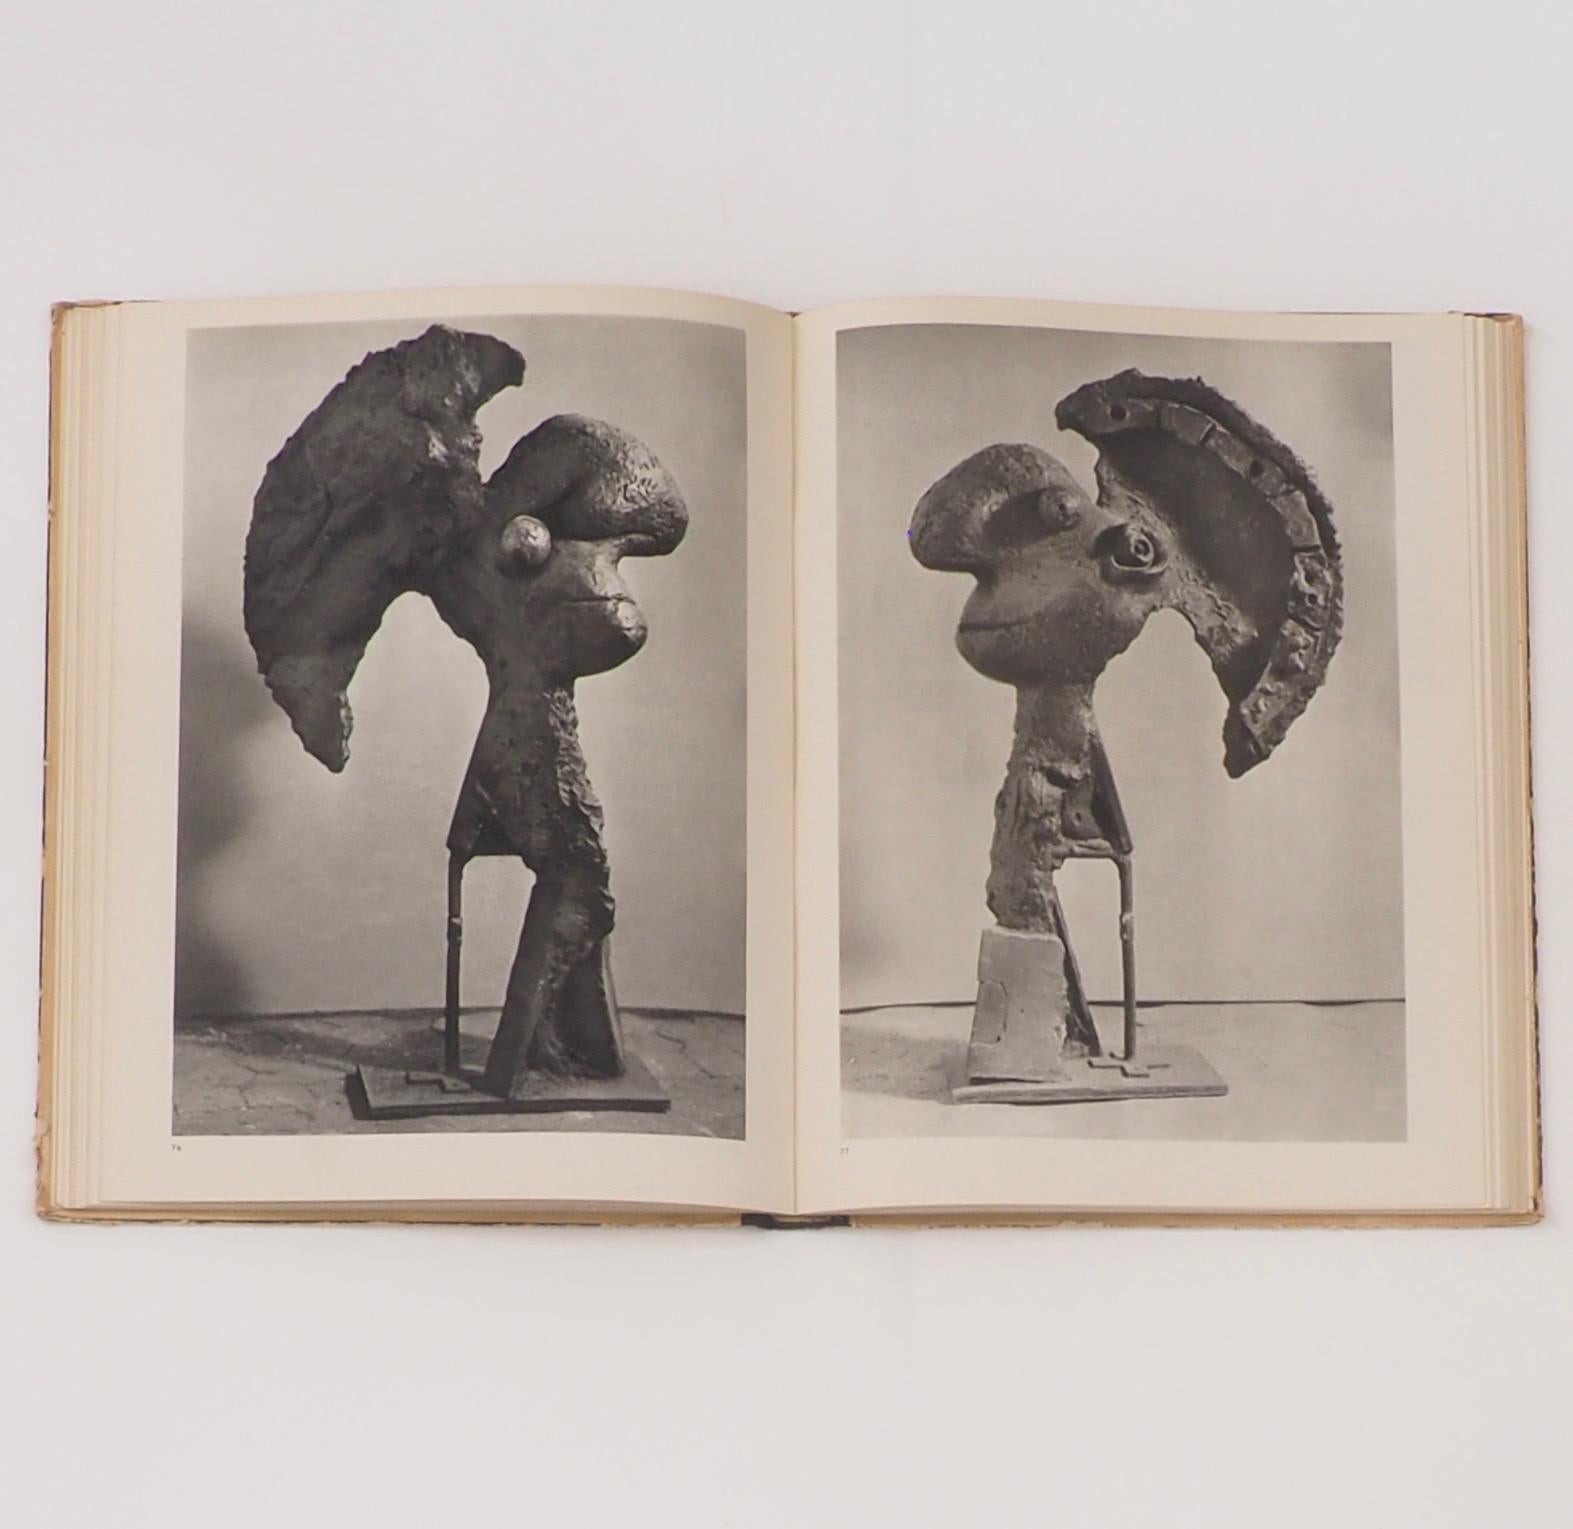 Les Sculptures de Picasso. 
Photographs by Brassai. Text in French by Daniel Henry Kahnweiler. Published by Les Editions du Chêne, Paris 1949

An important collaboration between Picasso and the great photographer Brassai who chose the artist's hand